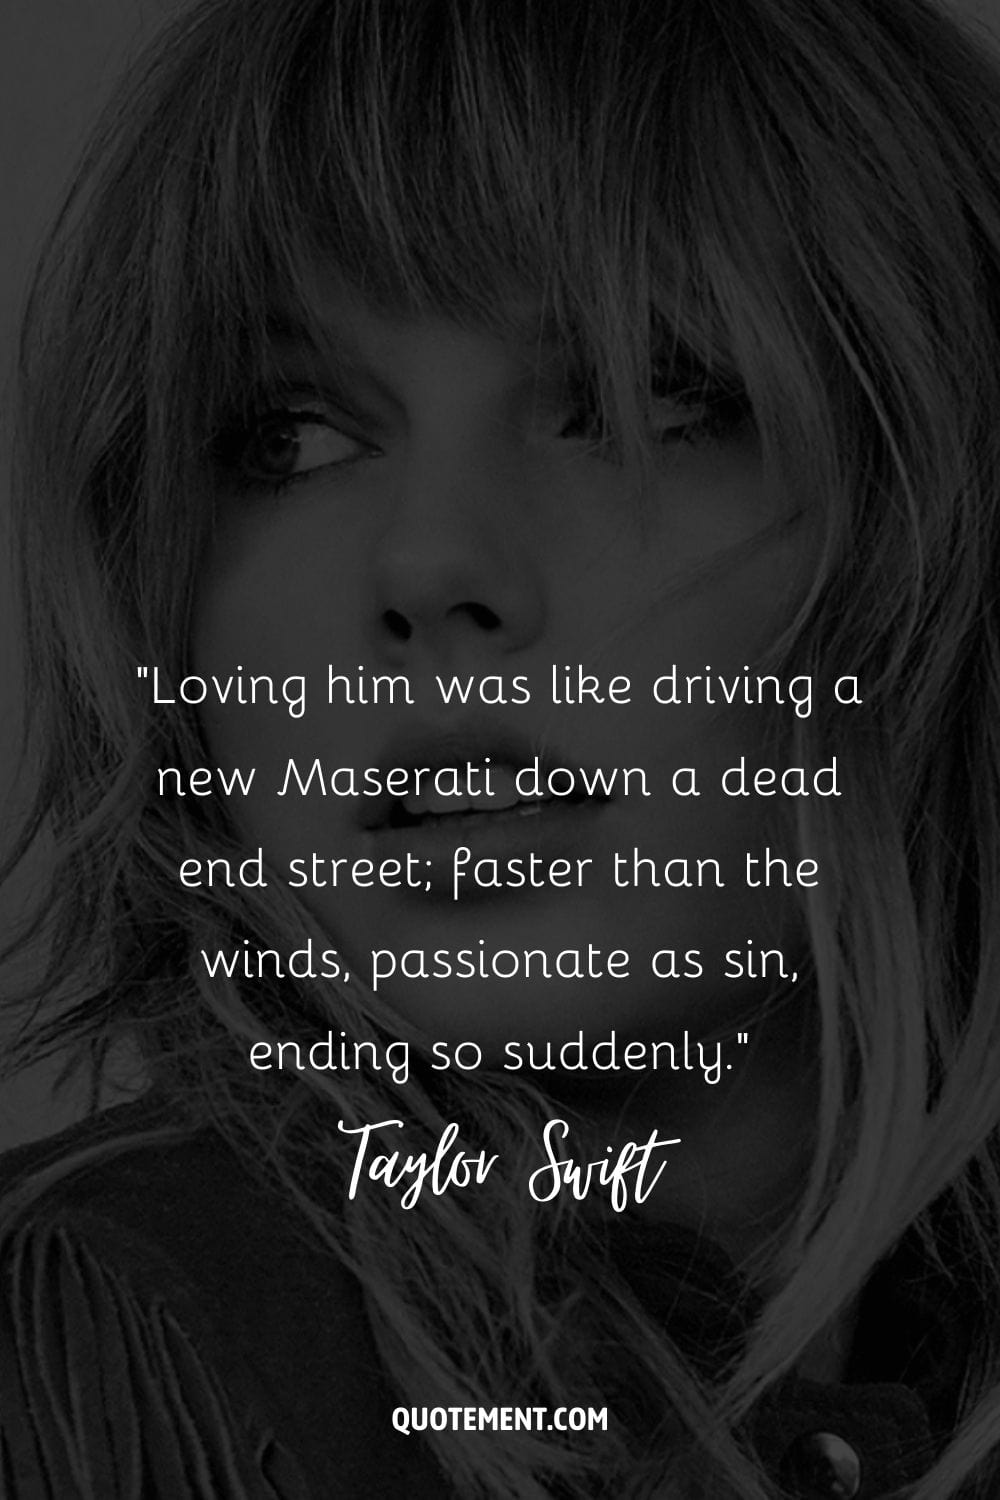 “Loving him was like driving a new Maserati down a dead end street; faster than the winds, passionate as sin, ending so suddenly.” ― Taylor Swift